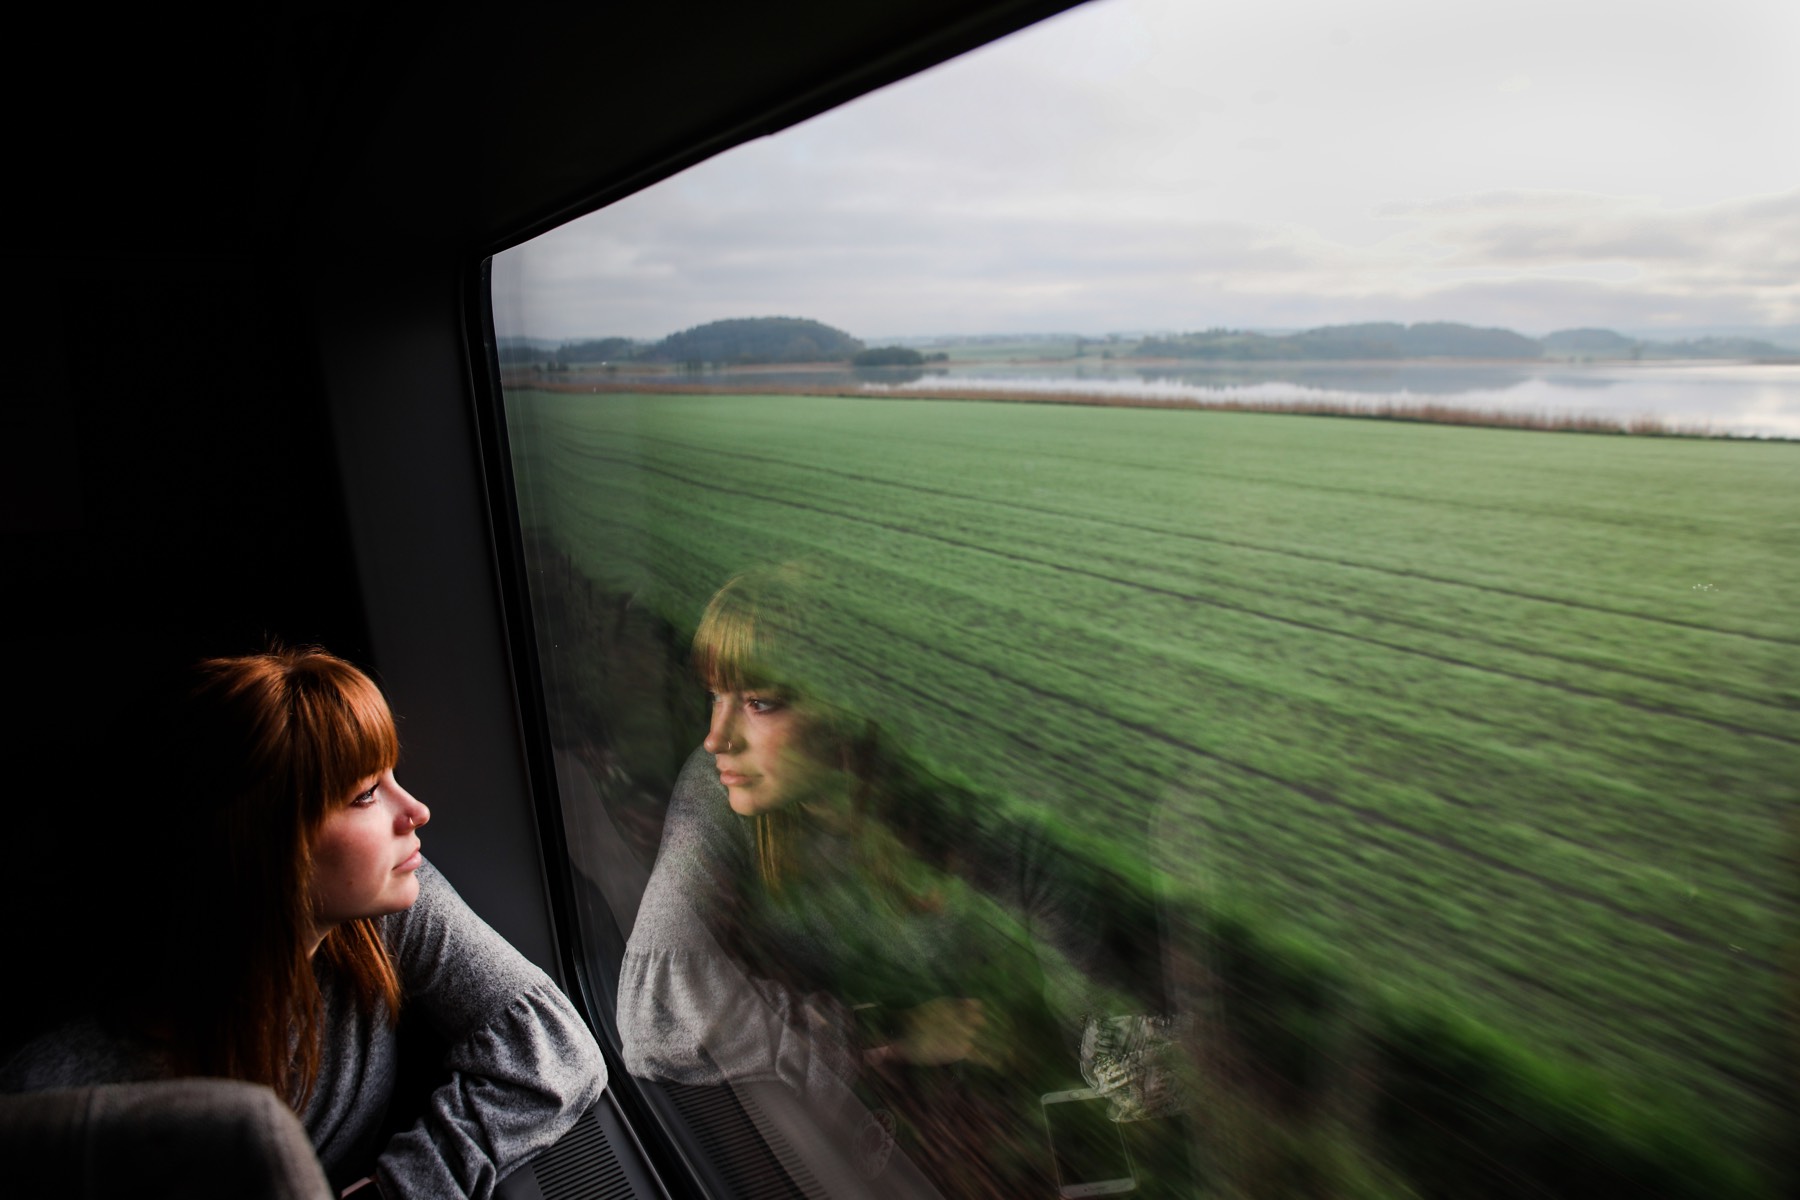 A student looks out a train window